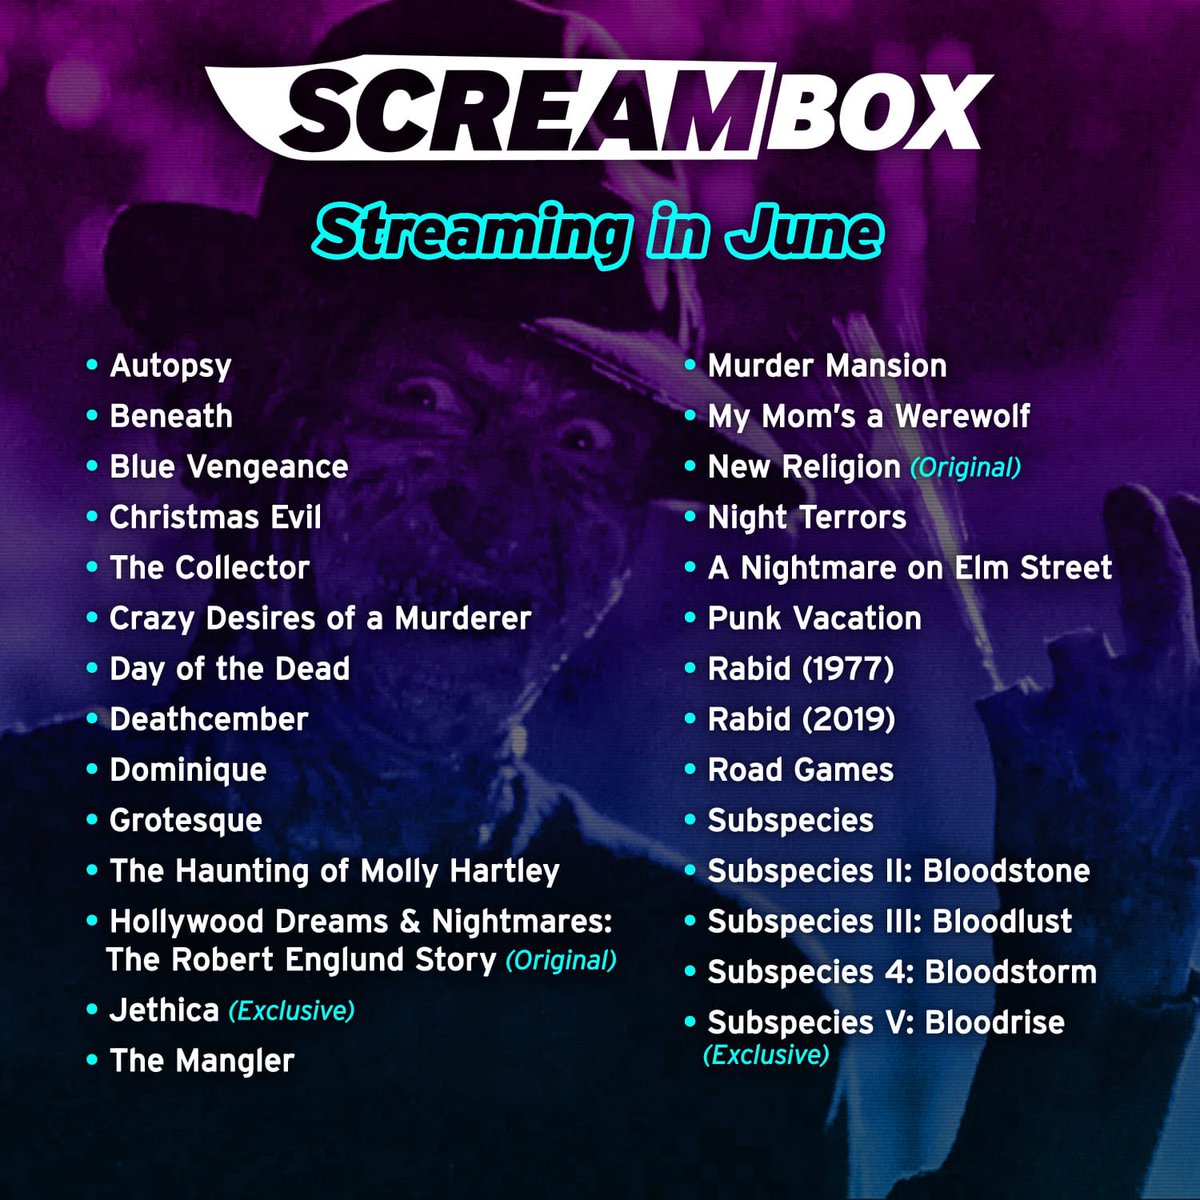 😱😱😱
@ScreamboxTV is bringing the GOODS!!
A huge month of @RobertBEnglund appreciation and celebration on the service!

Plus a TON of @fullmoonhorror films drop this month.

Are you Subscribed yet?!? No? 
Well I think it's time to change that 😉

#robertenglund #subspecies